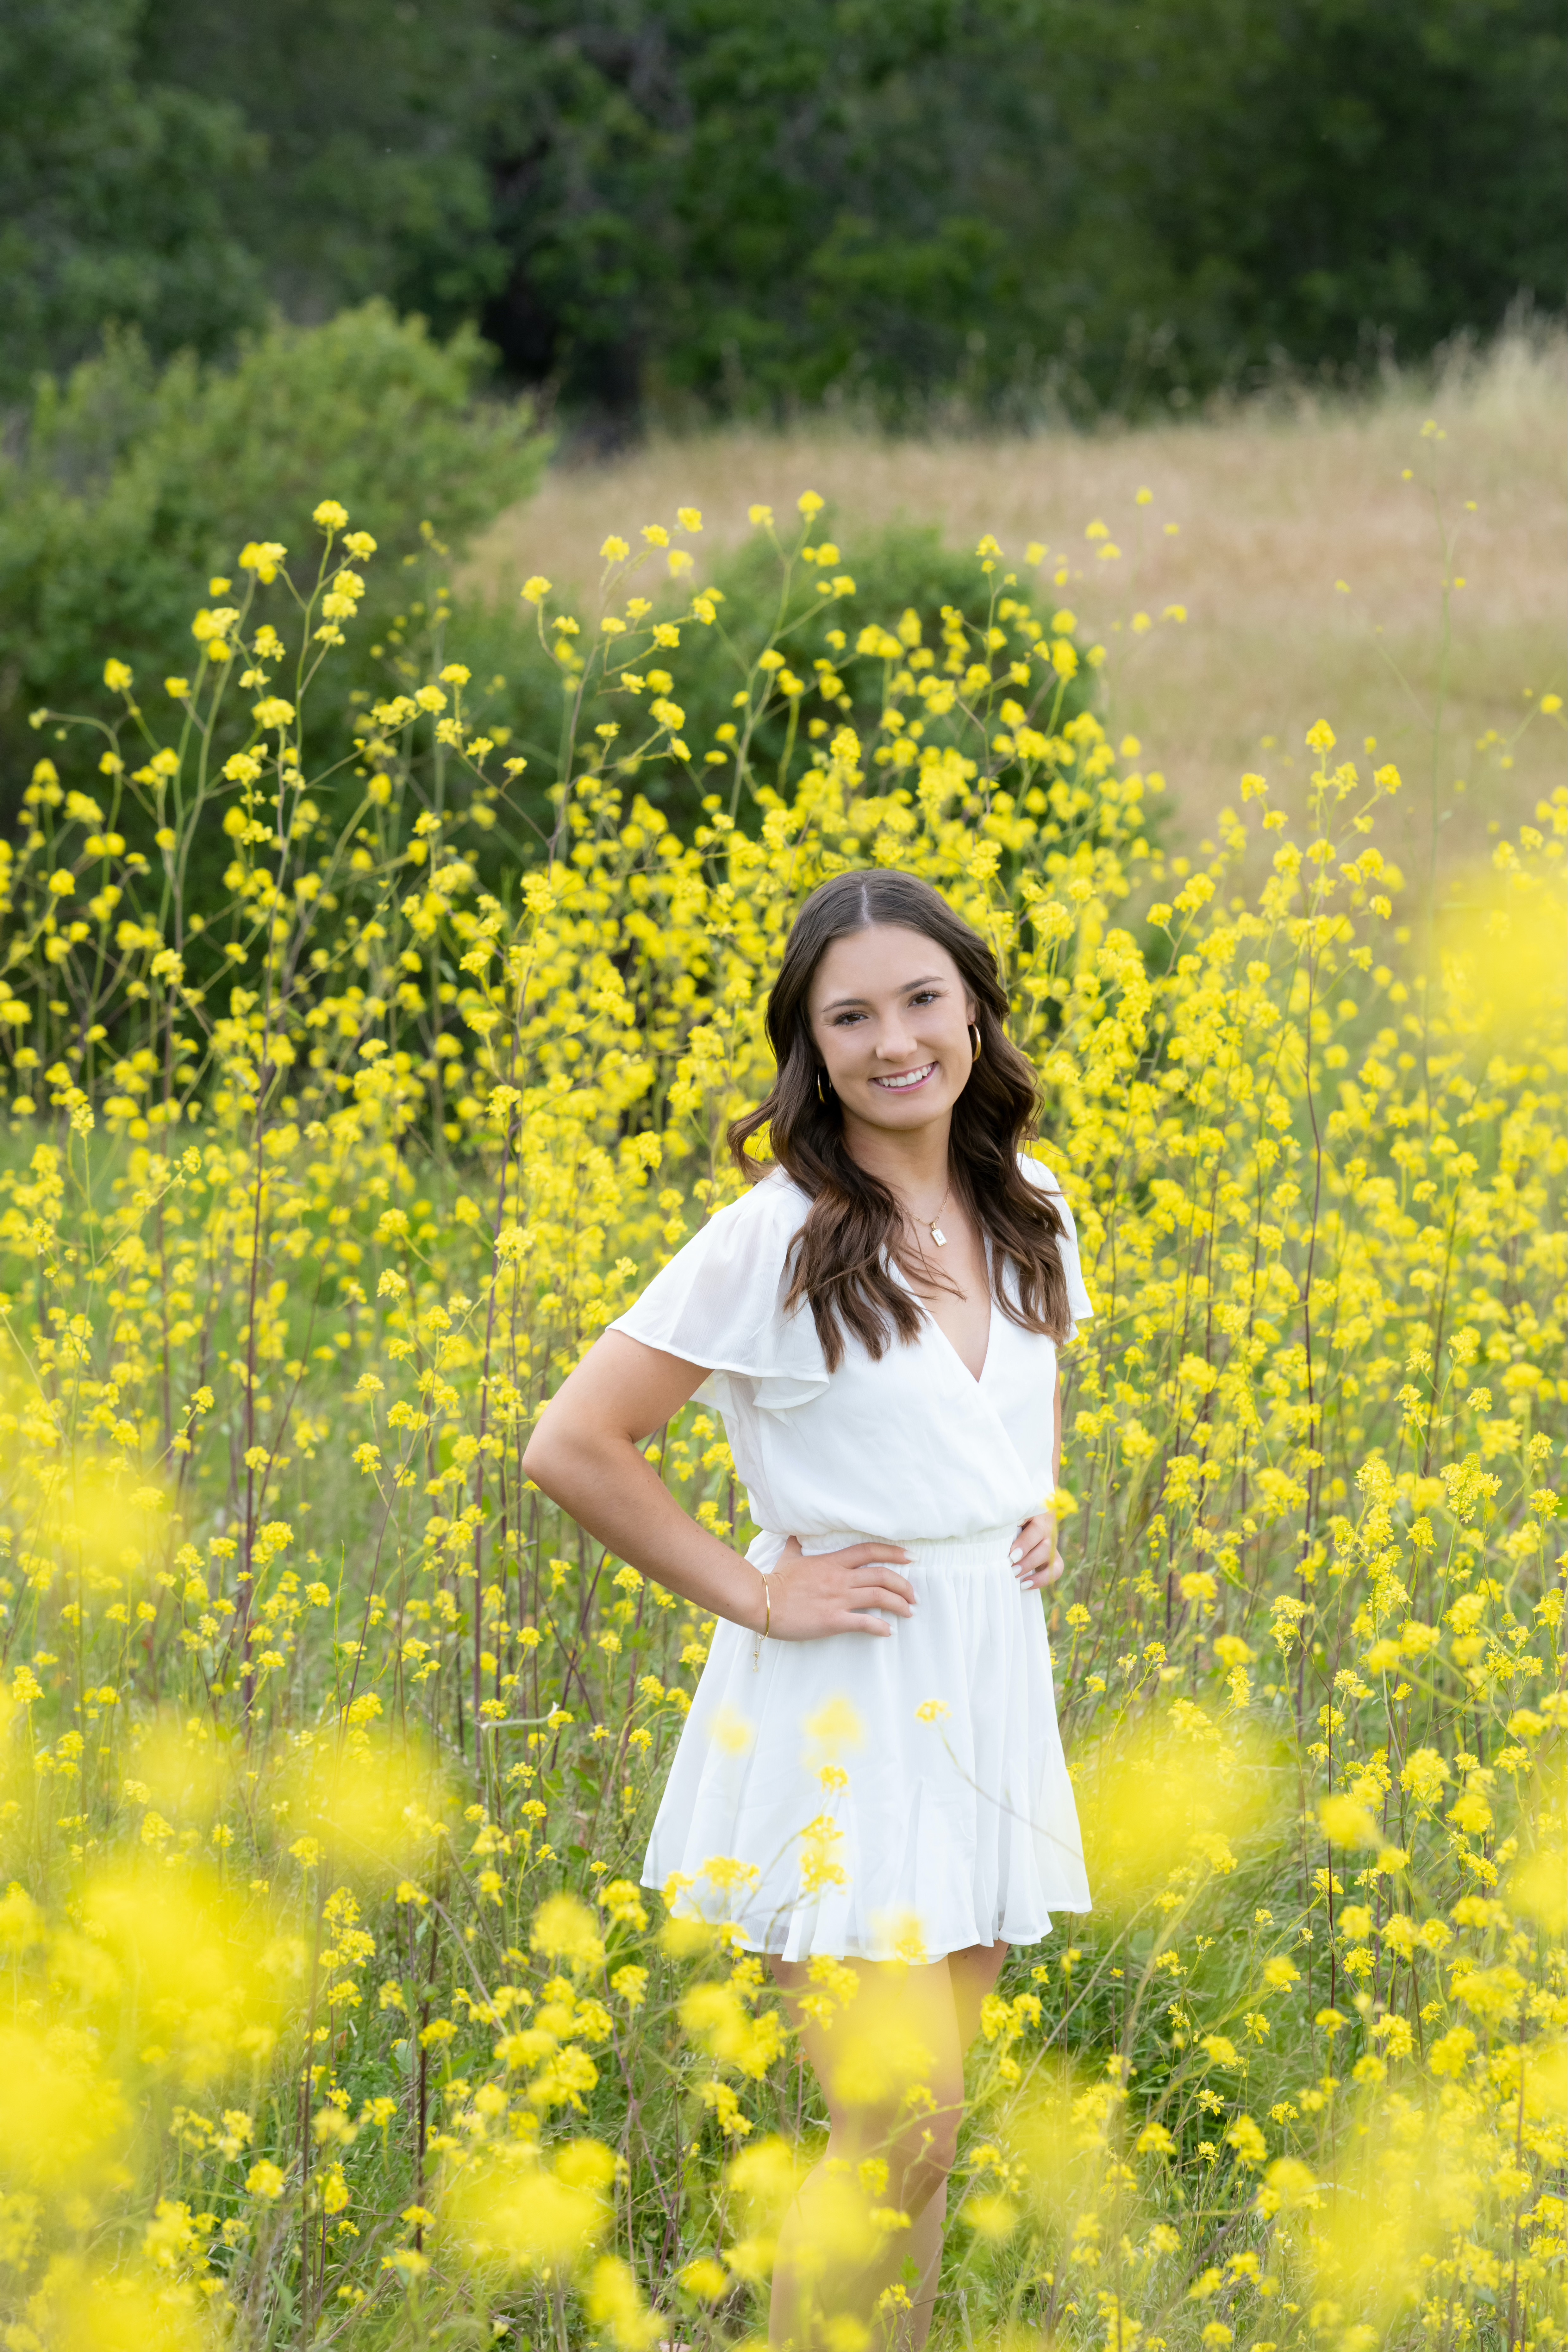 Lucy McAfee poses in a field of yellow wild flowers